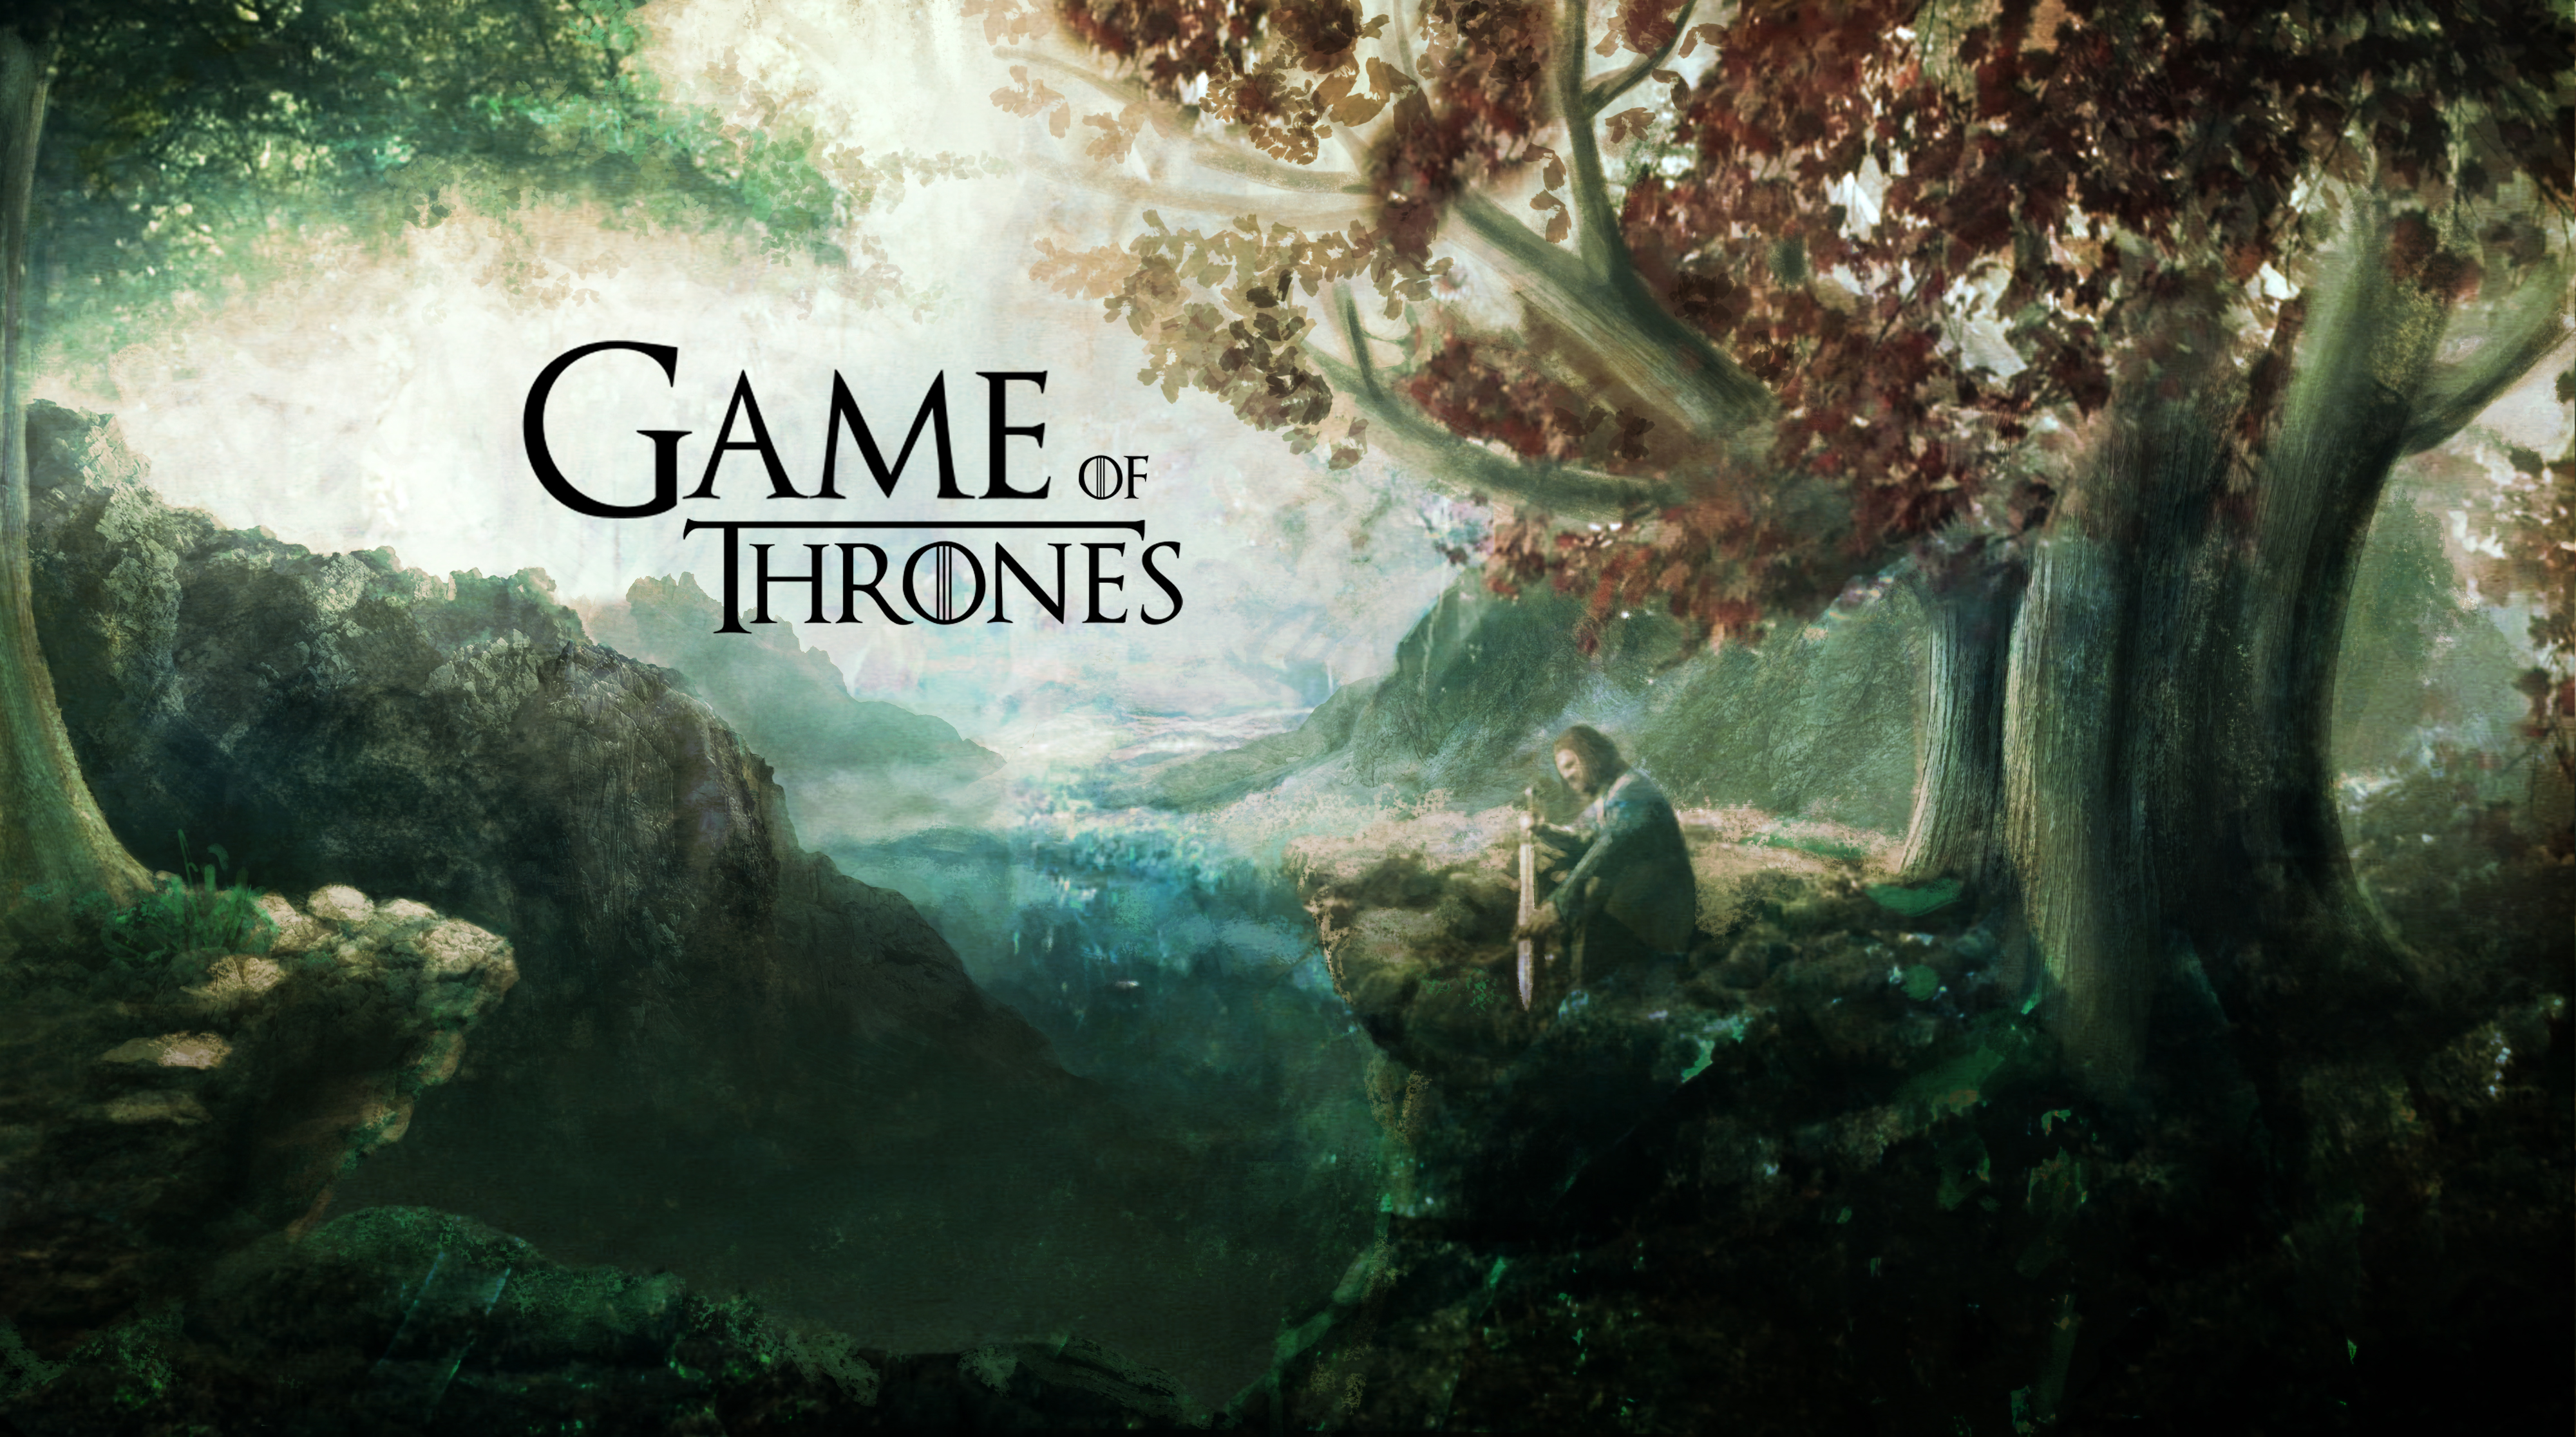 This Game of Thrones Wallpaper blew me away gameofthrones 4000x2231